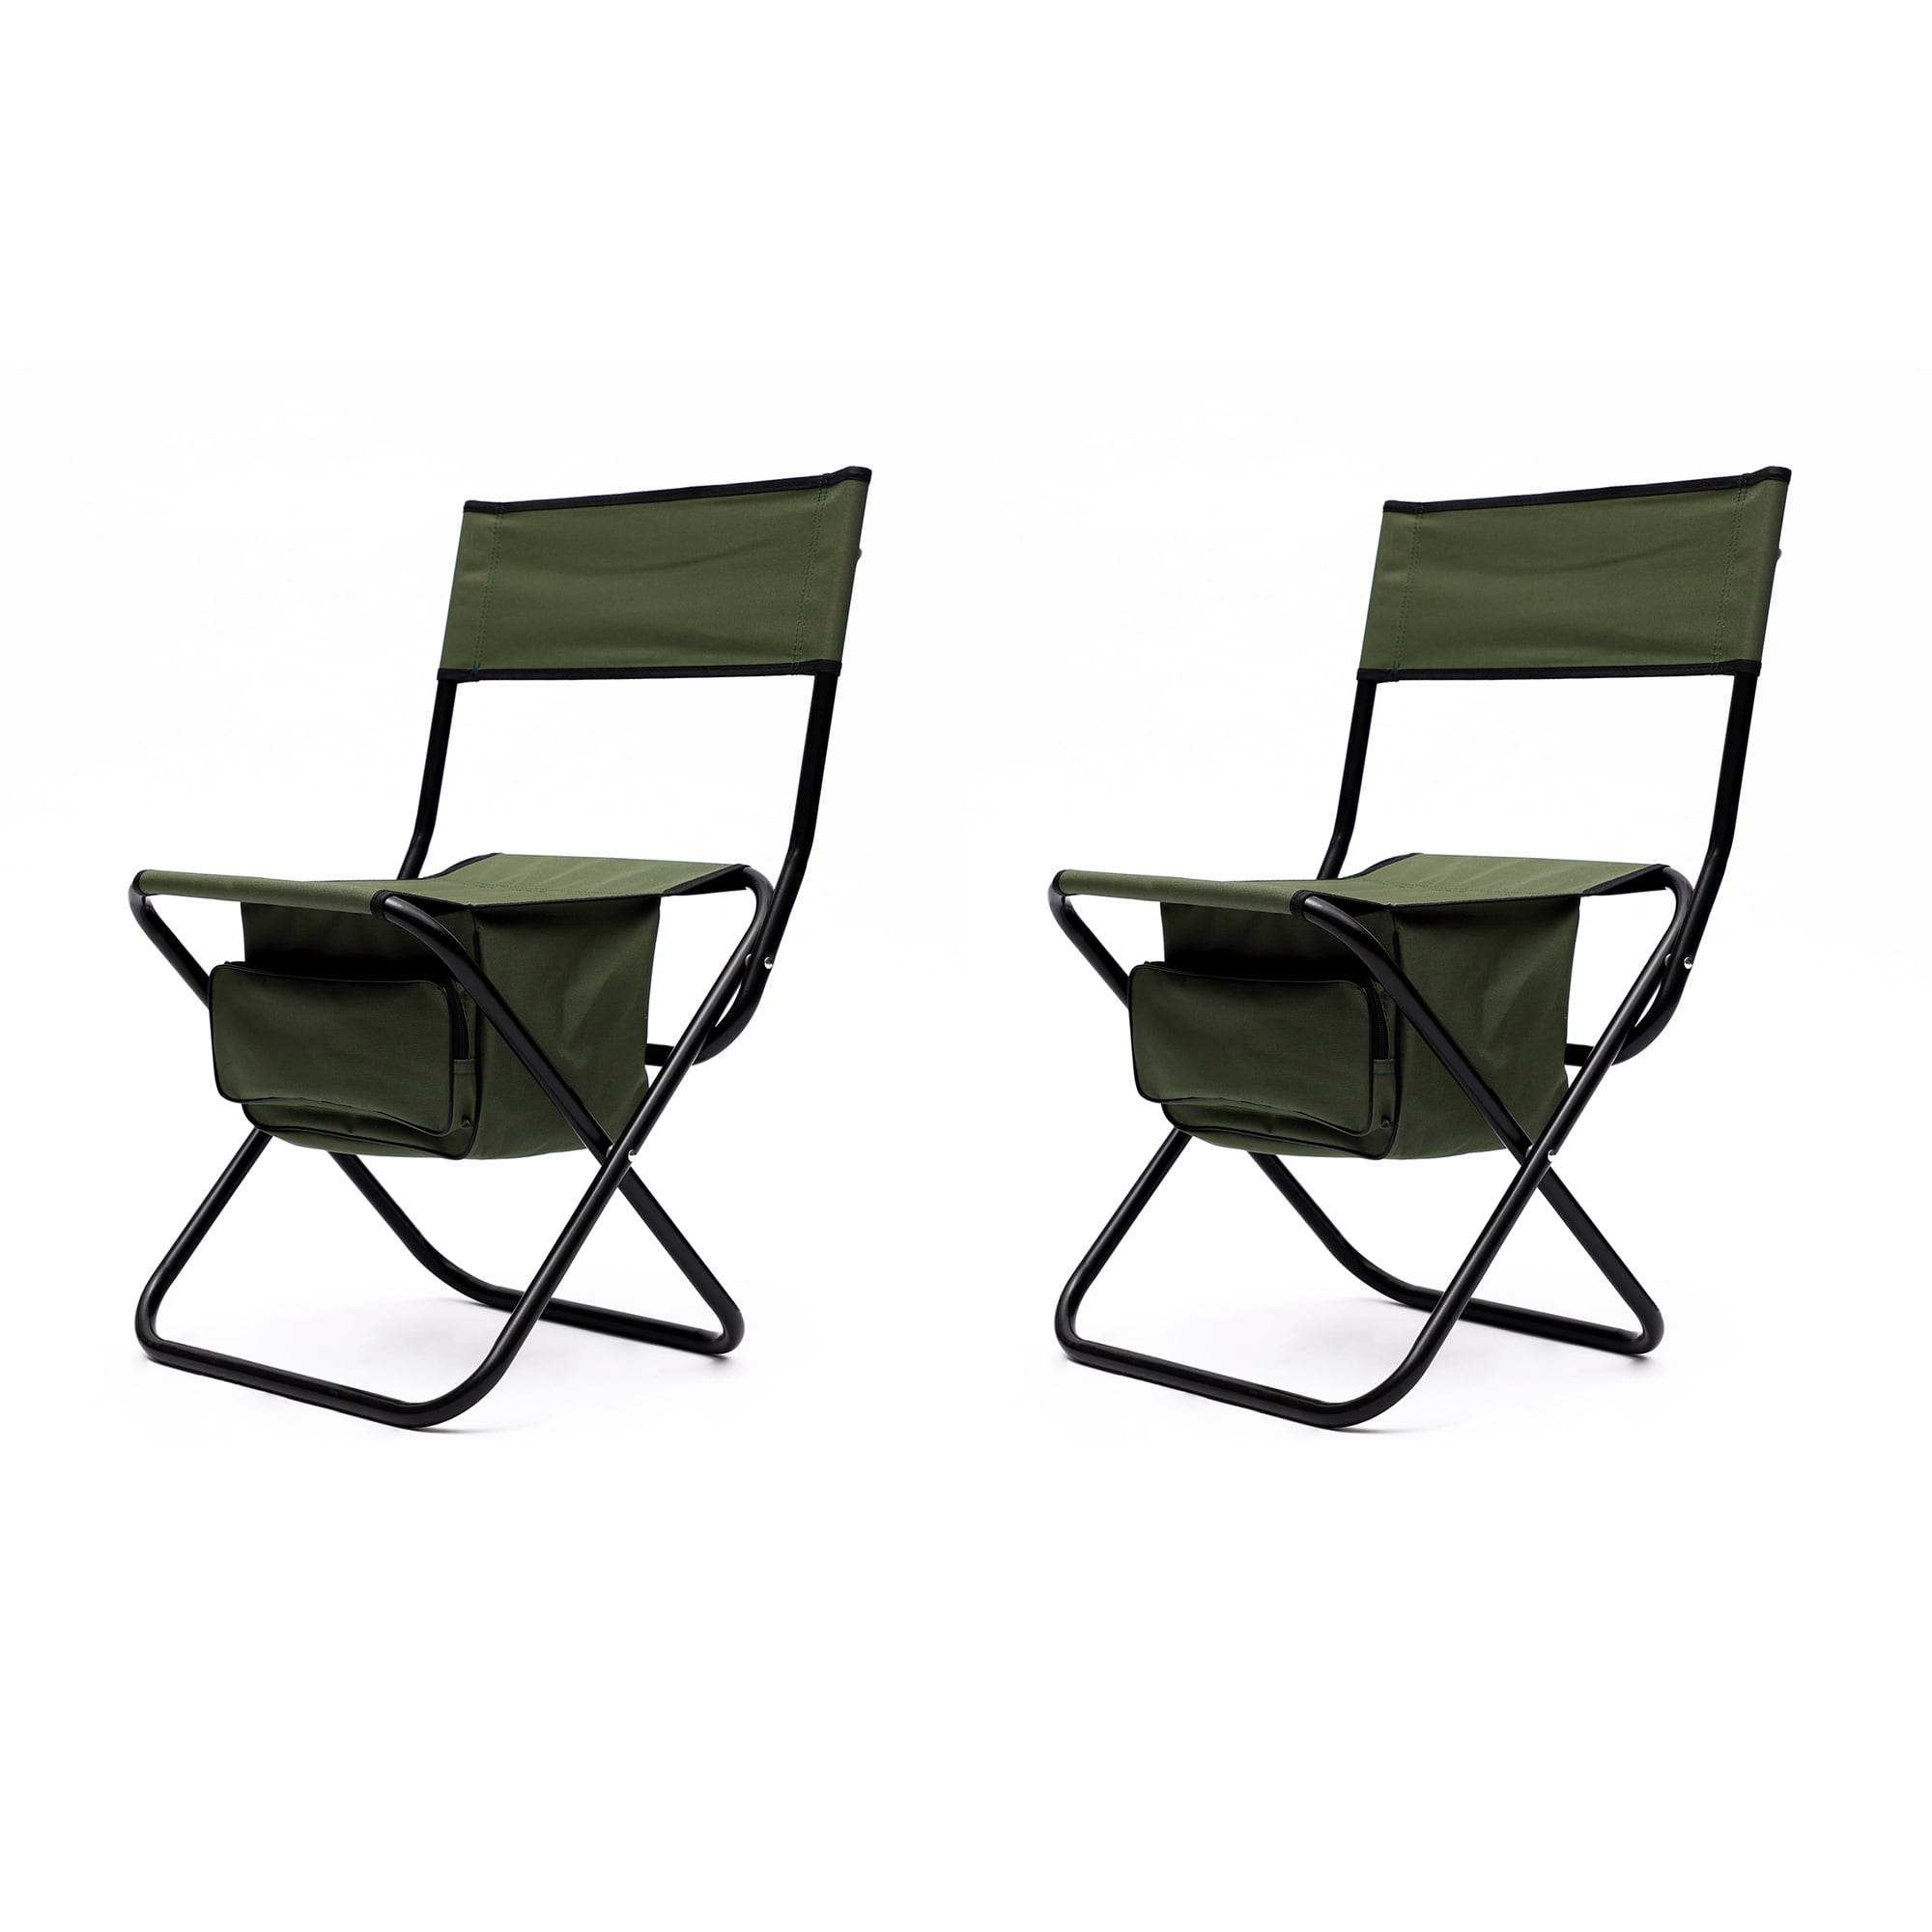 2-Piece Folding Outdoor Chair with Storage Bag, Portable Chair for Indoor,  Outdoor Compact Lightweight Camping Chair, Picnics and Fishing Chair,  Supports 280lbs, Green 